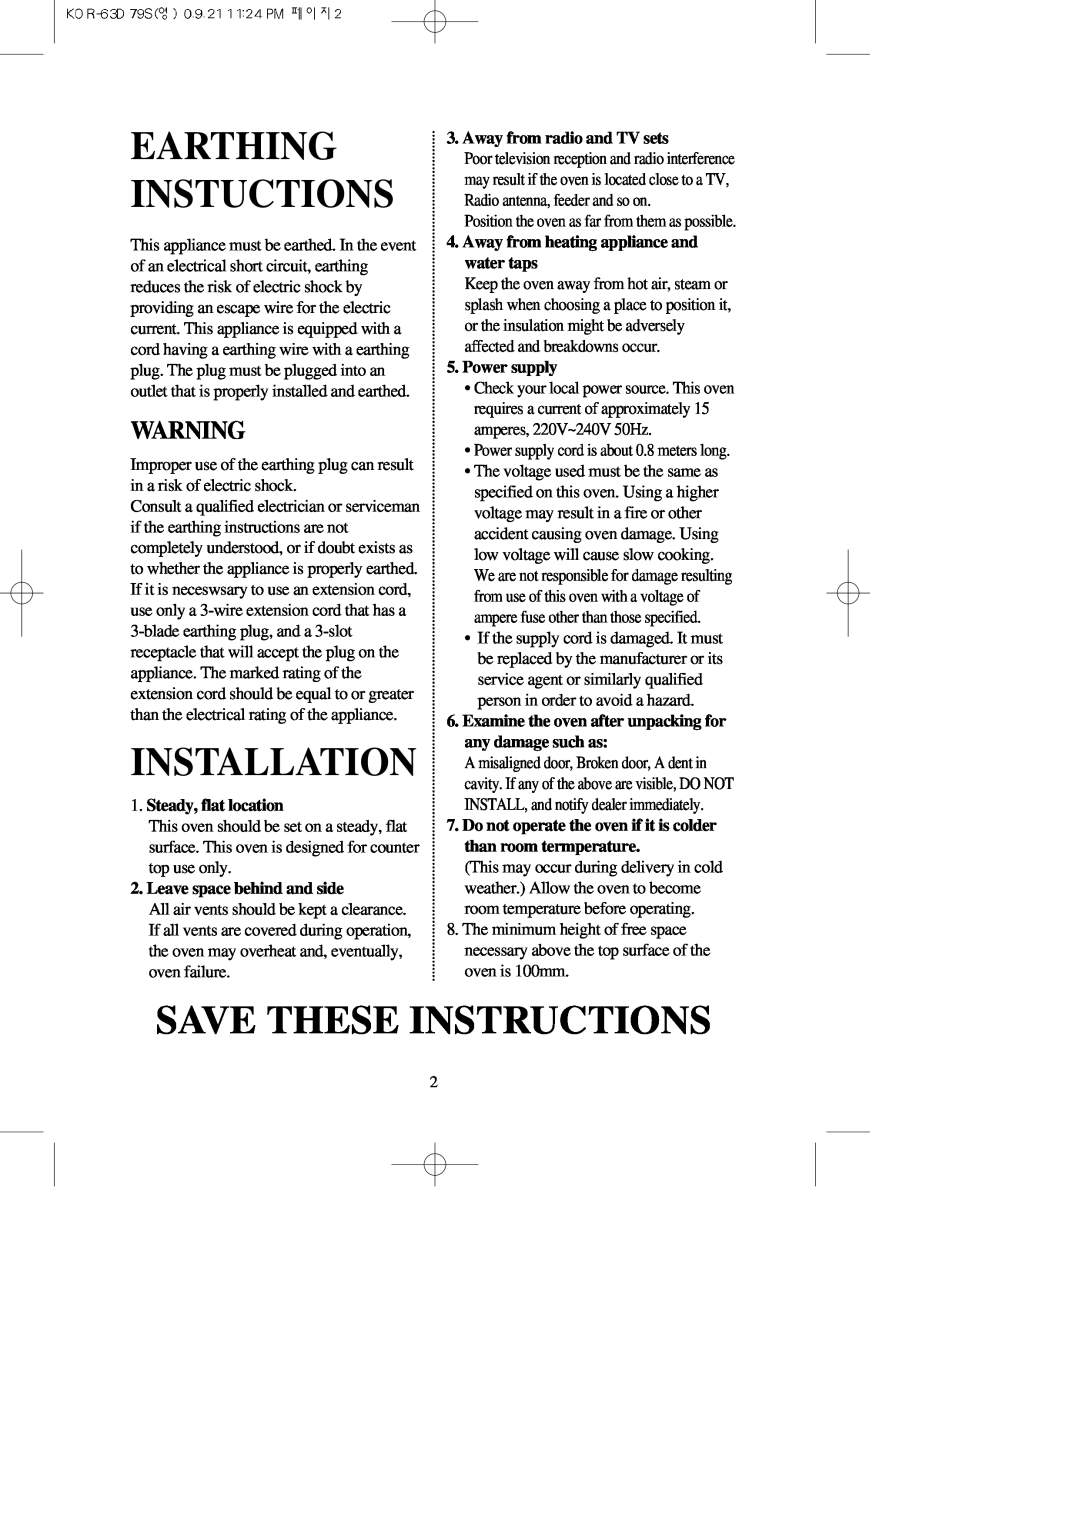 Daewoo KOR-63D79S manual Earthing Instuctions, Installation, Save These Instructions, Steady, flat location, Power supply 